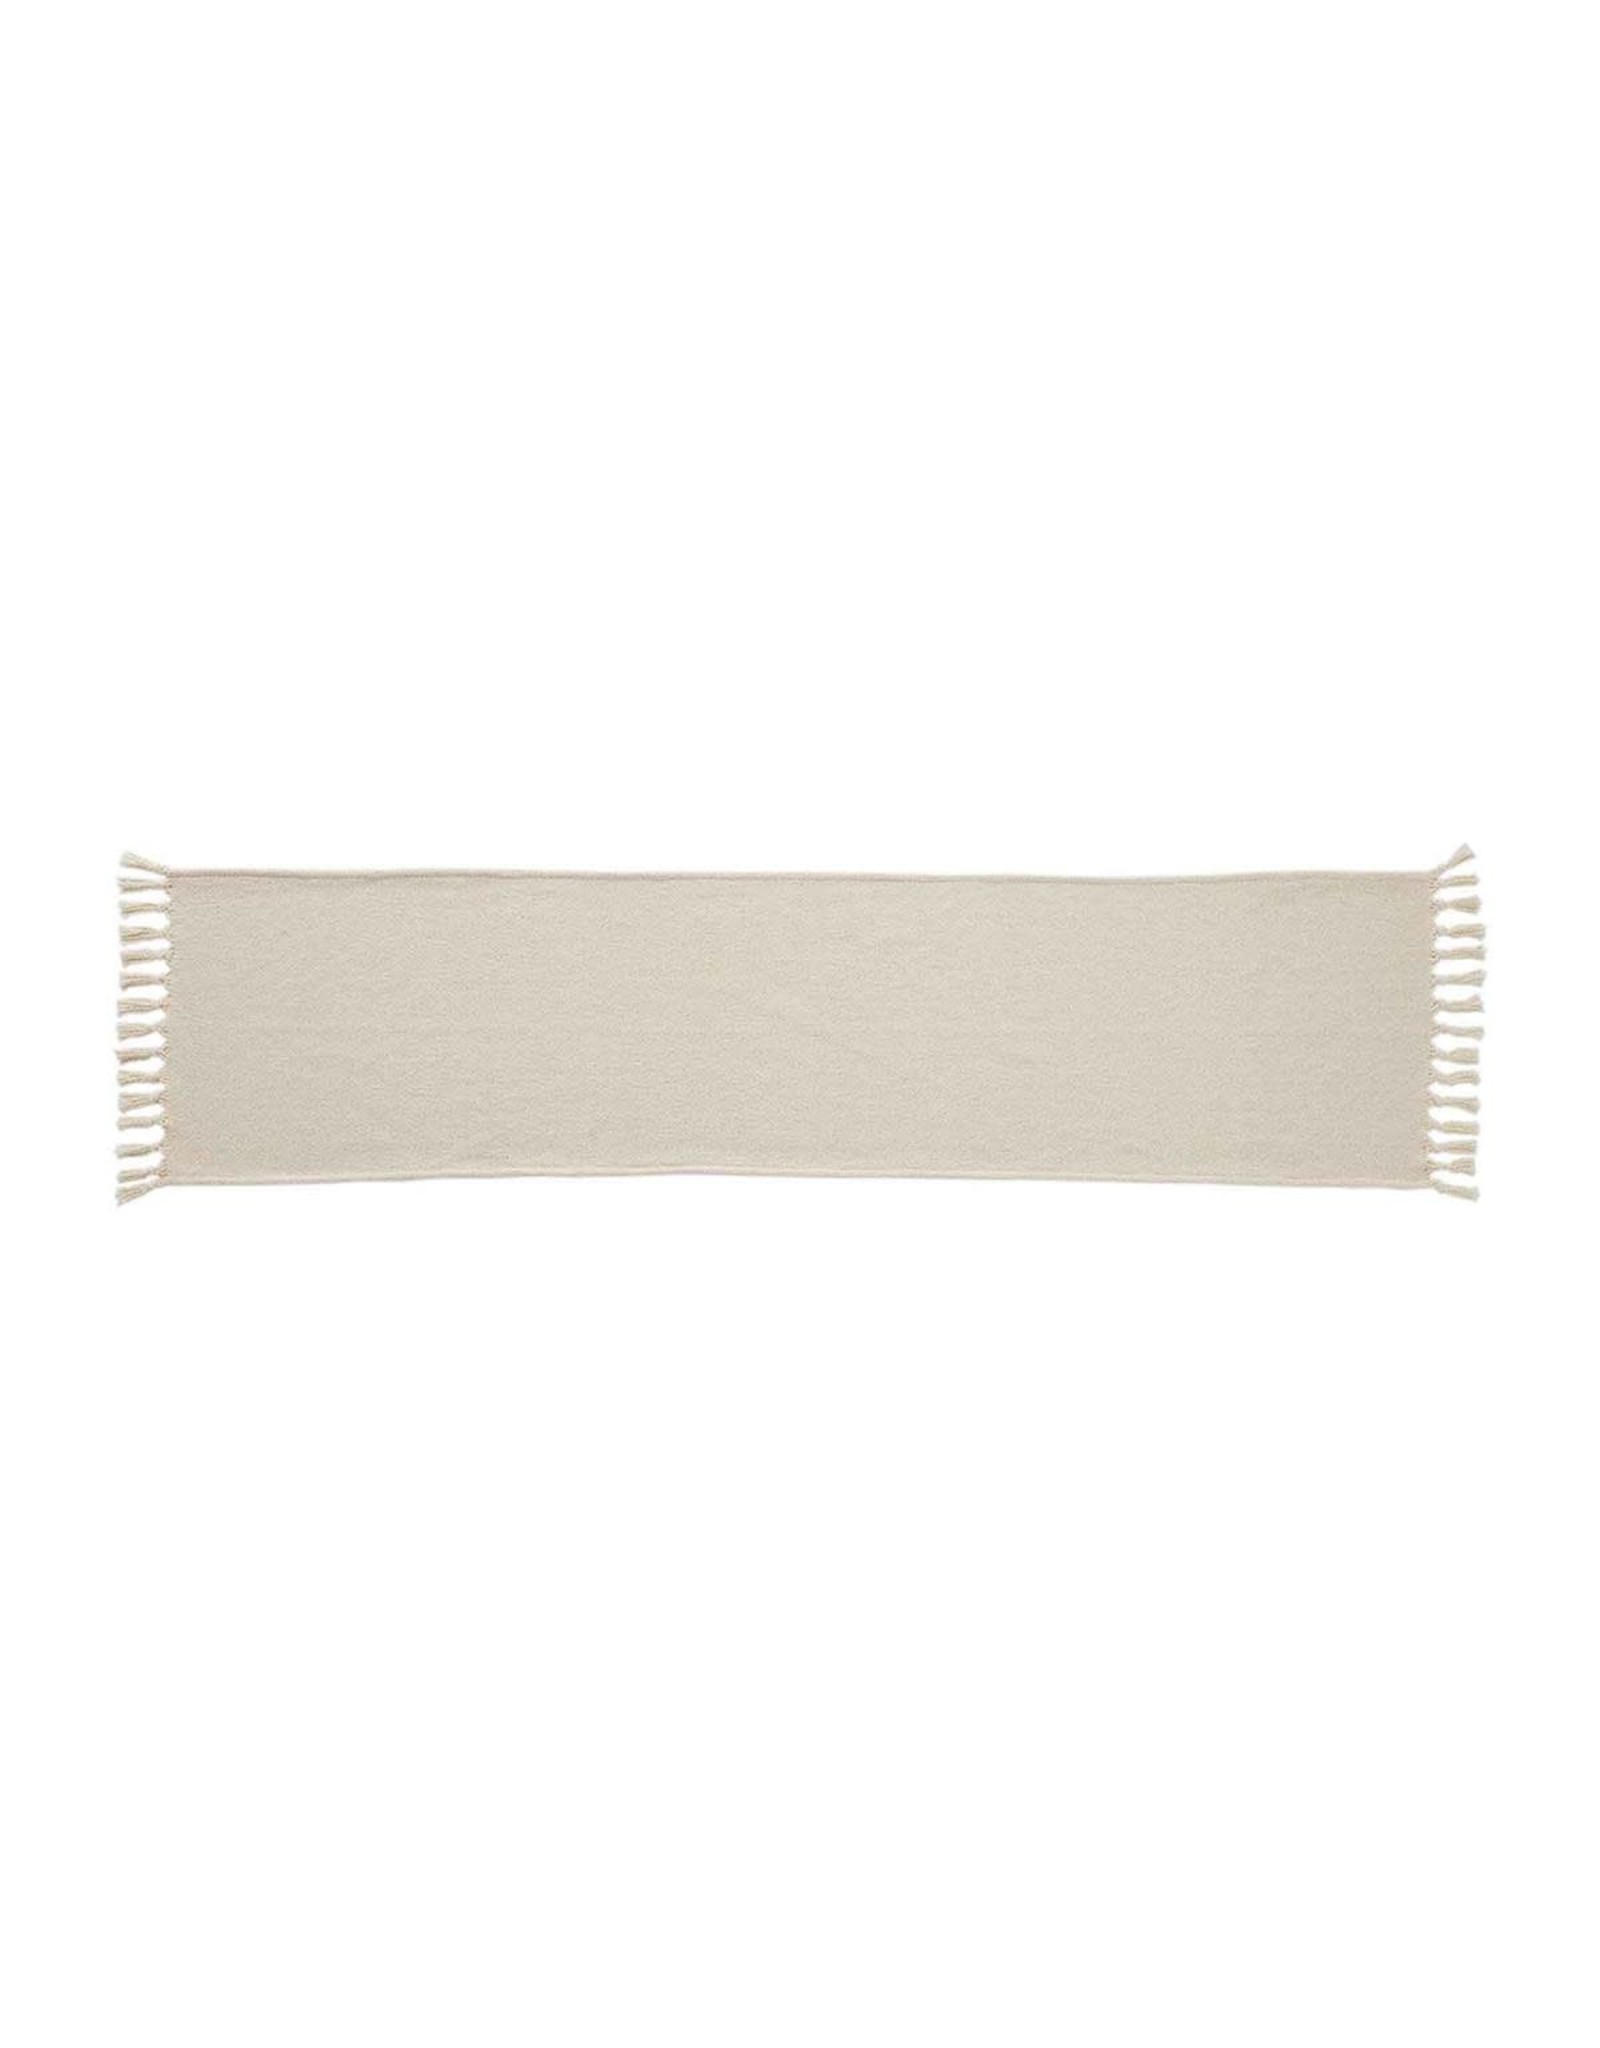 Mud Pie Off White Fringe Table Runner 18x72 Inches